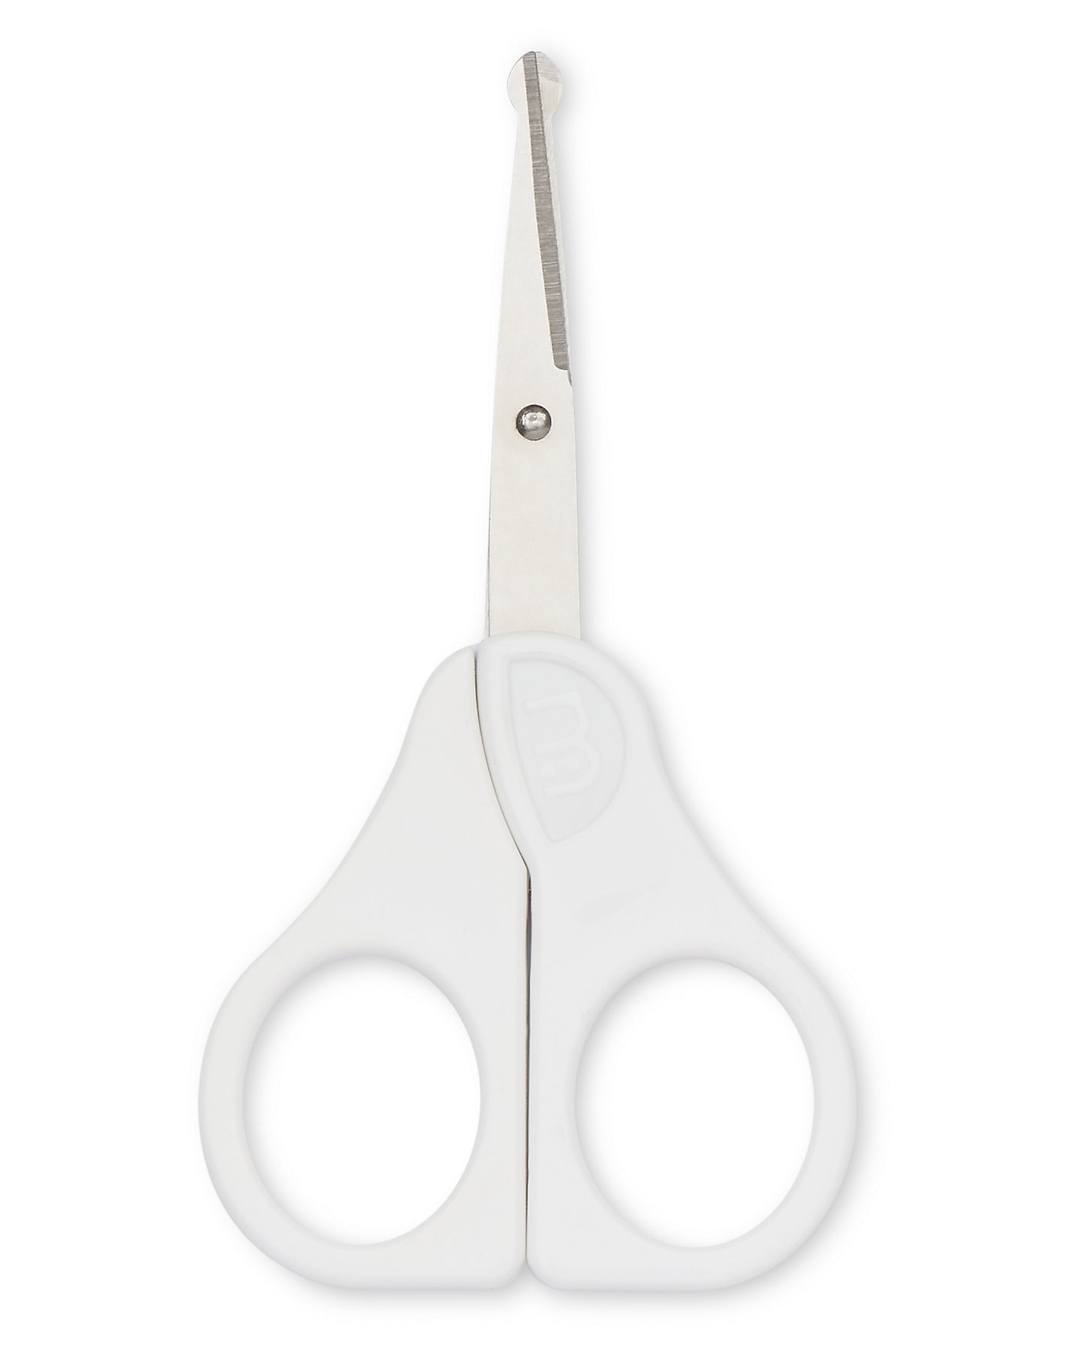 Tenartis Baby Nail Scissors with Curved Blades and Round Tips(3.5